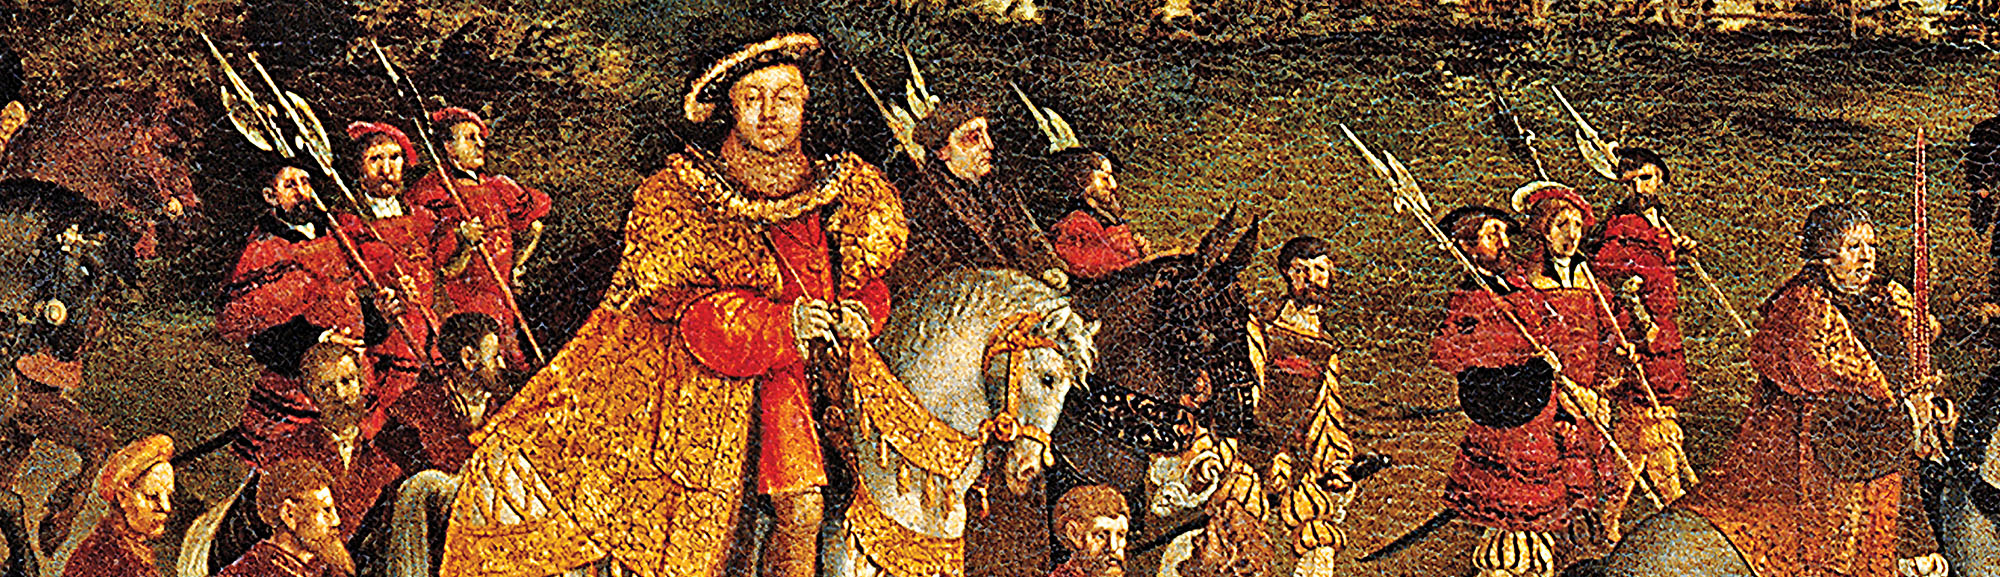 king henry viii contributions